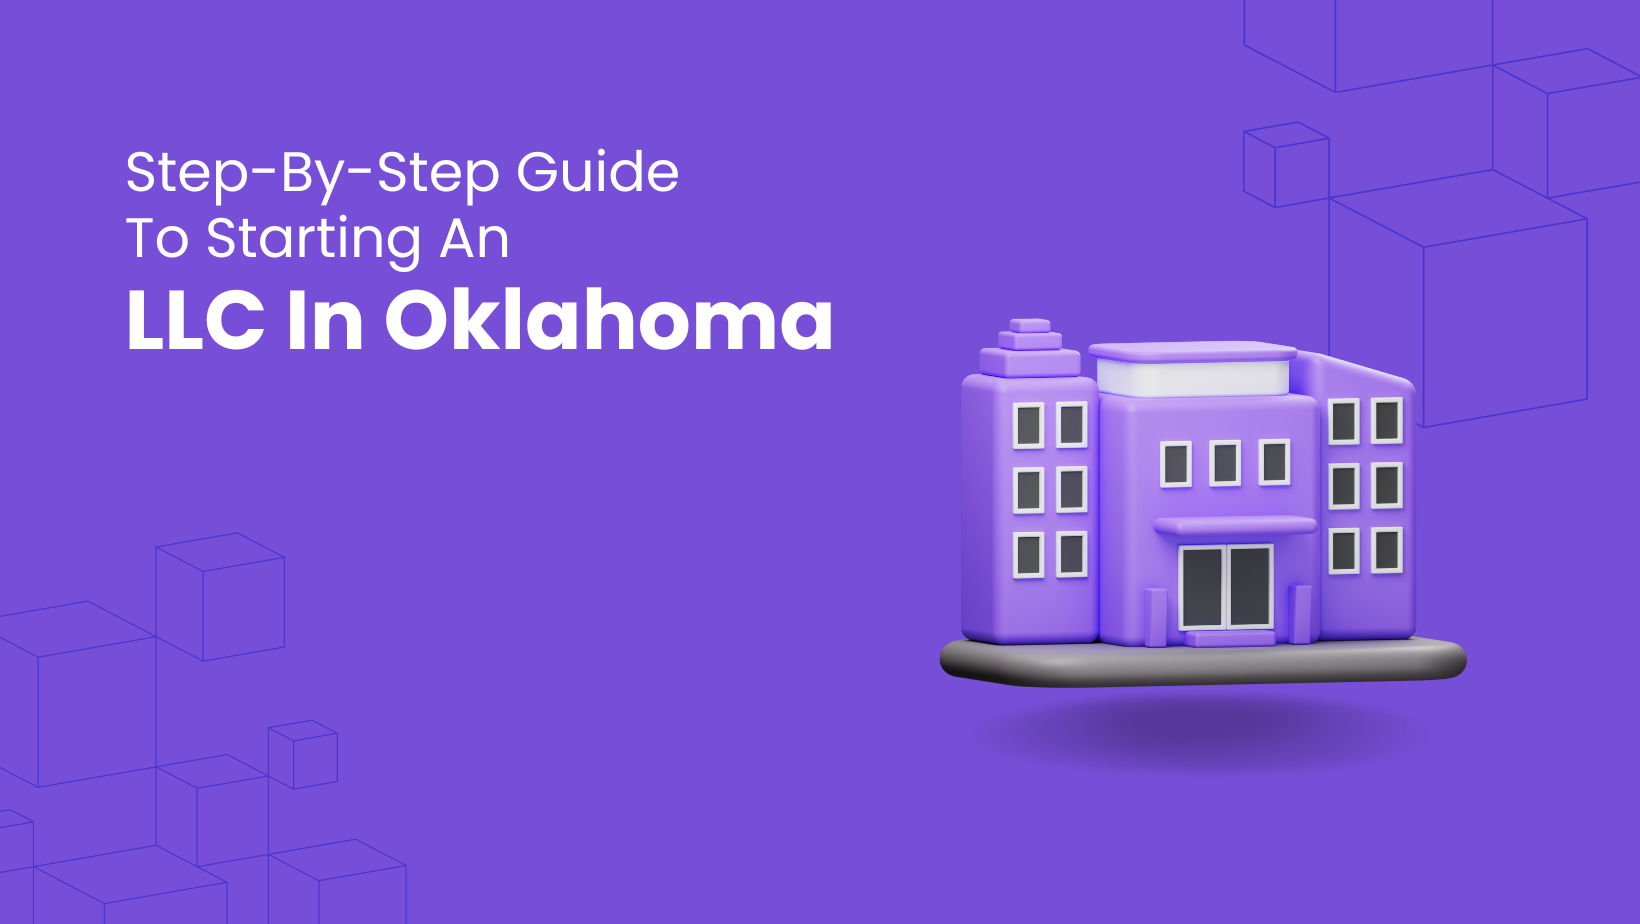 Step-By-Step Guide To Starting An LLC In Oklahoma